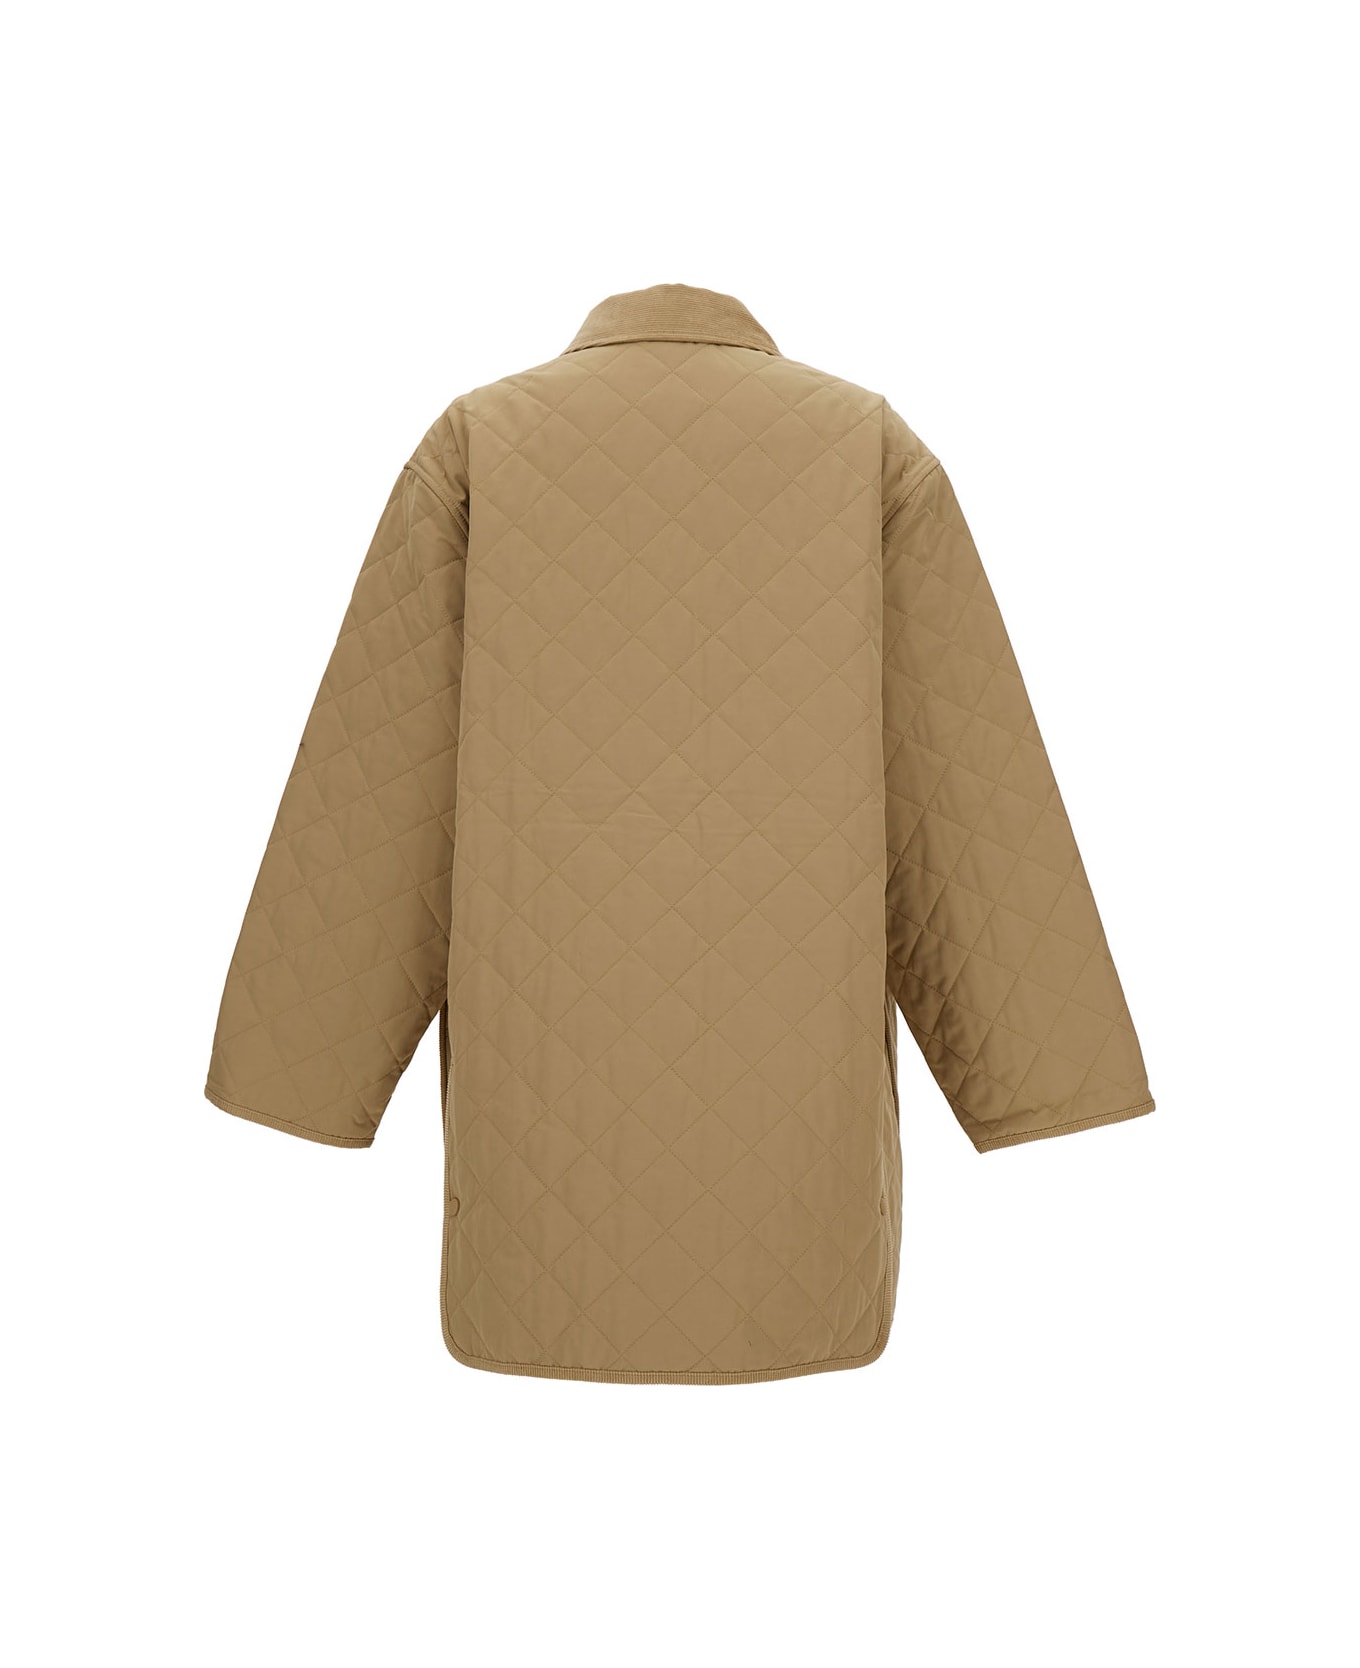 Totême Beige Jacket With Collar And Oversized Pockets In Quilted Fabric Woman - Beige